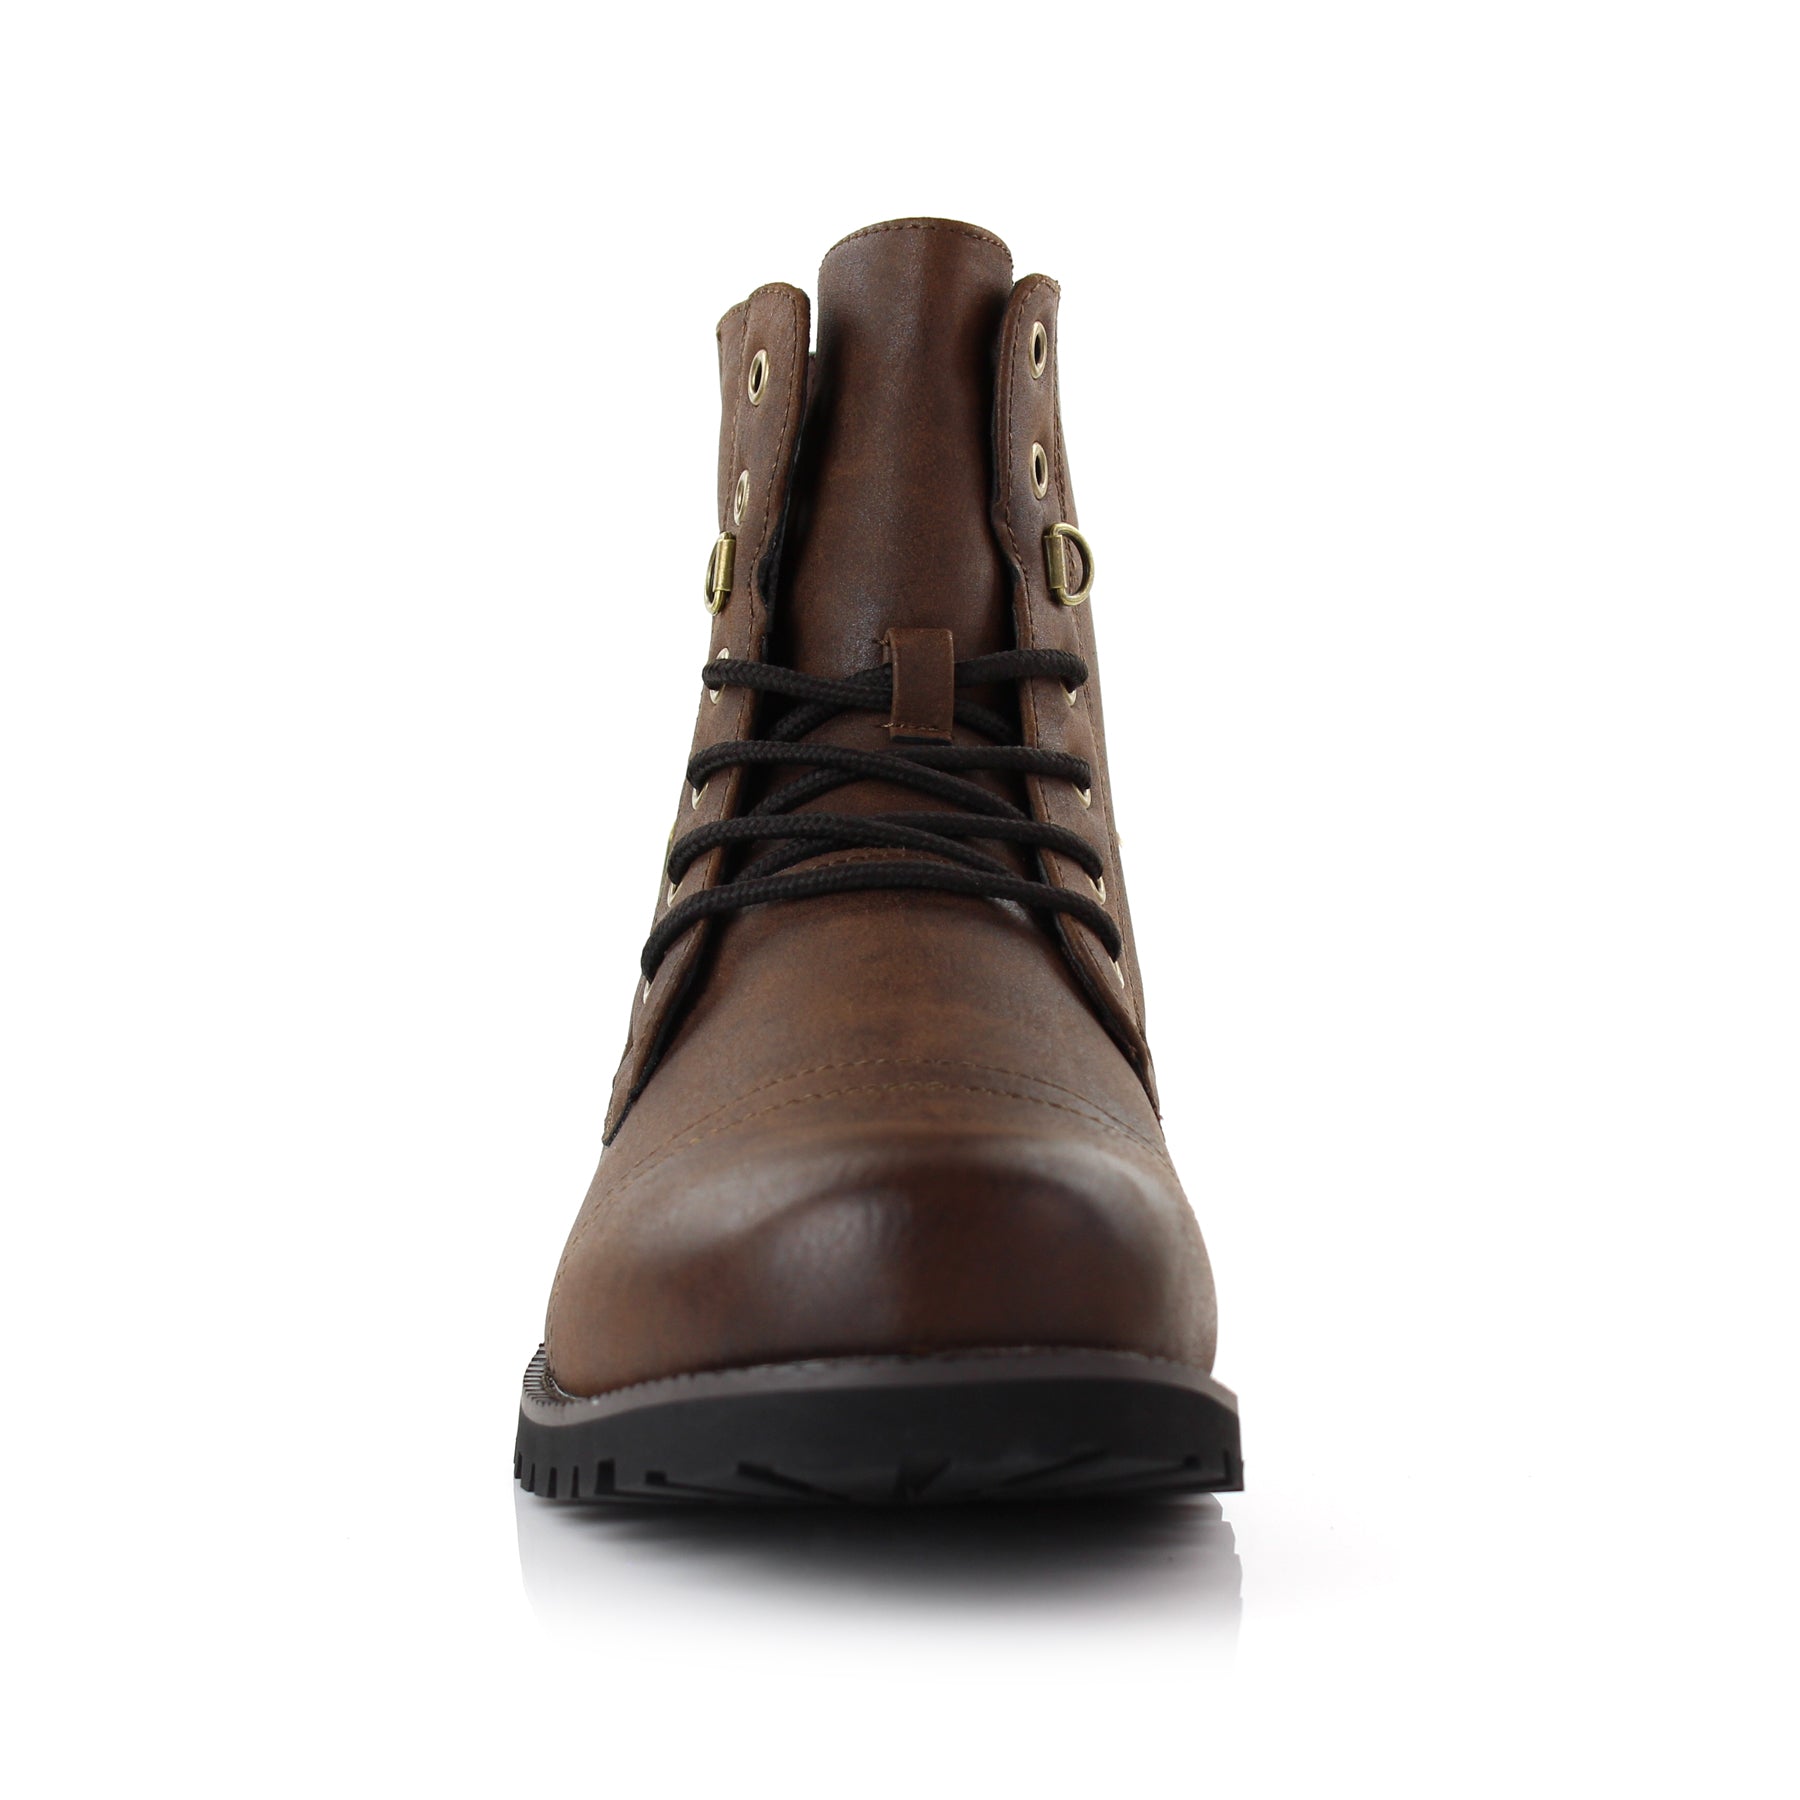 Rugged Inner Fur Boots | Fabian by Polar Fox | Conal Footwear | Front Angle View